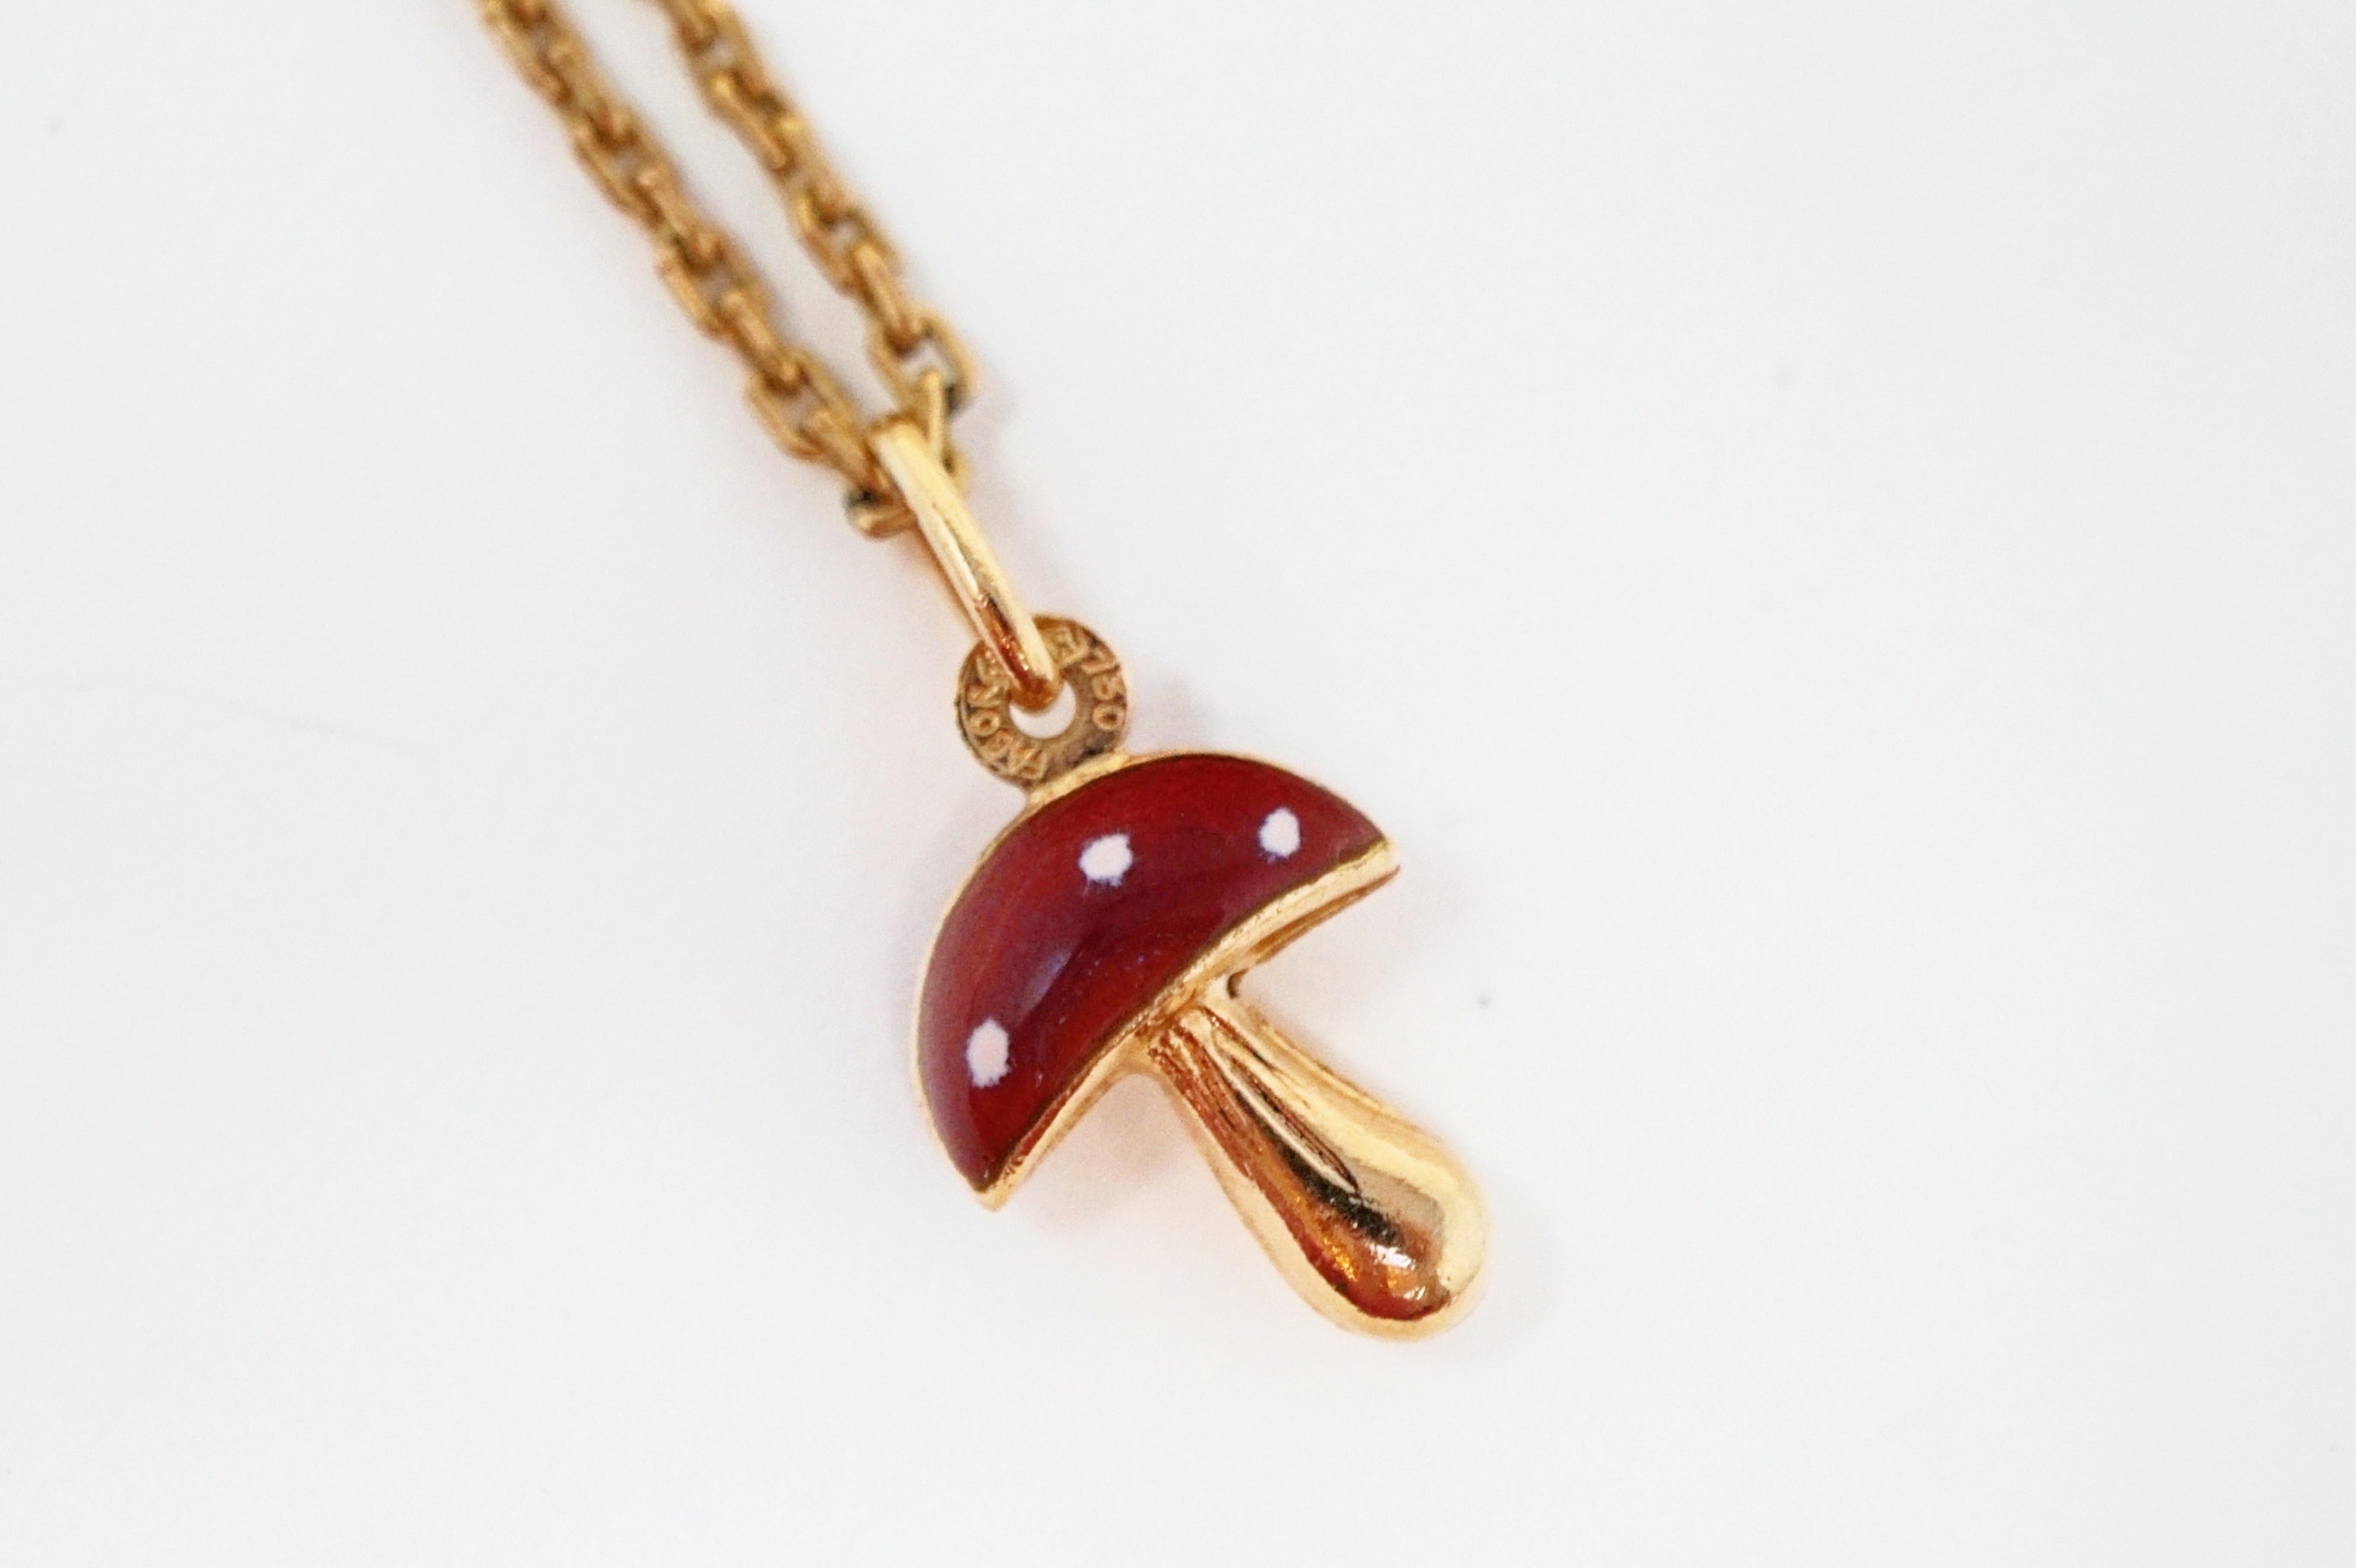 Dainty and whimsical vintage 18k gold three dimensional mushroom charm necklace with Guilloche enamel detailing by FABOR Italy, circa 1970s. 

DETAILS:
- Charm is approx .5